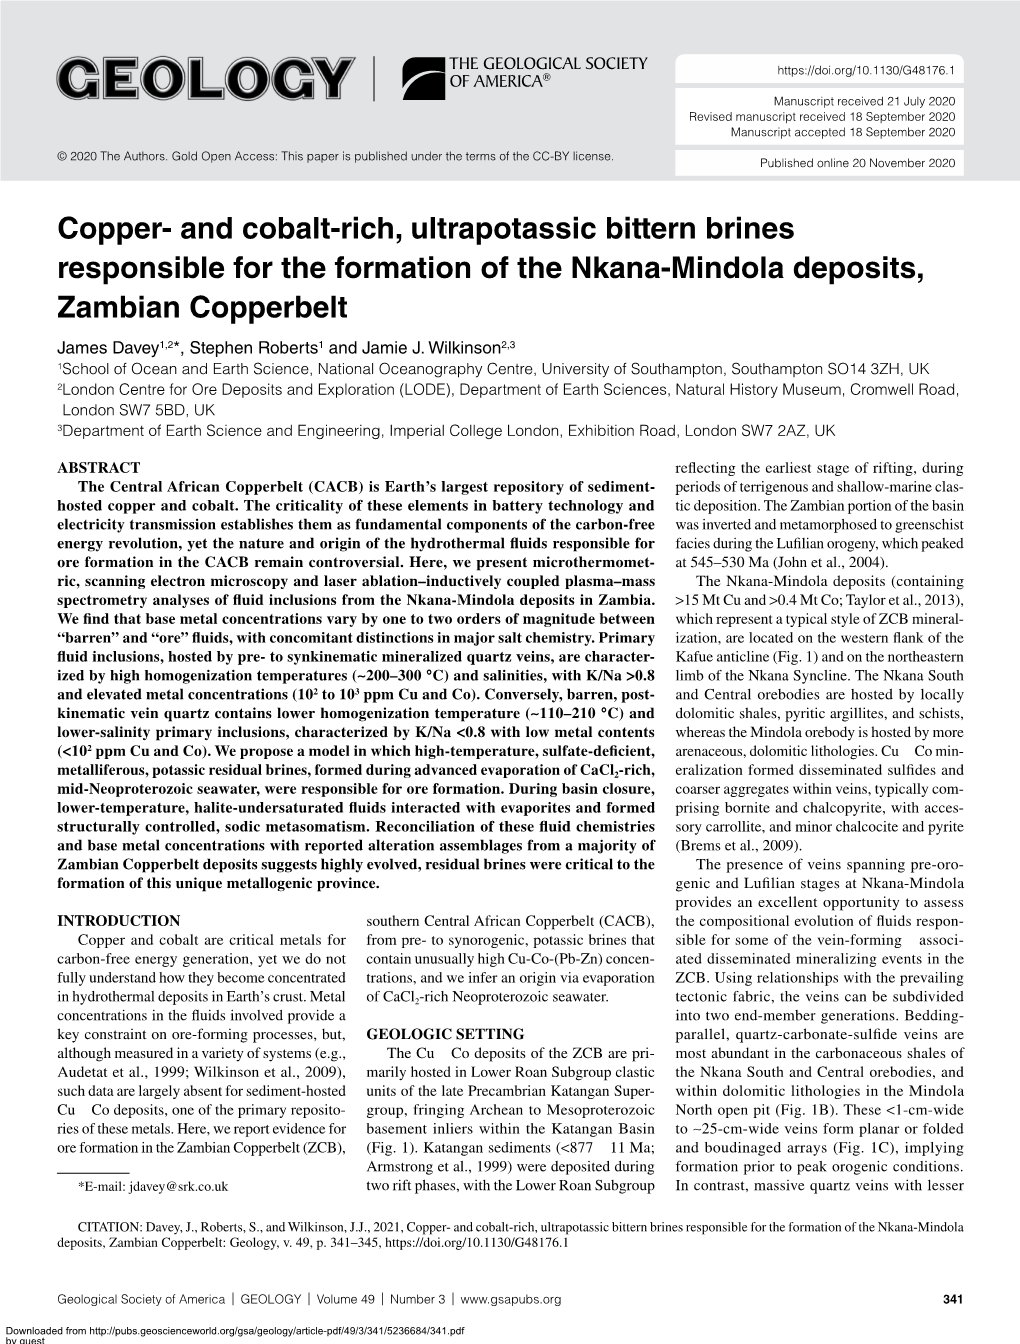 Copper- and Cobalt-Rich, Ultrapotassic Bittern Brines Responsible for The